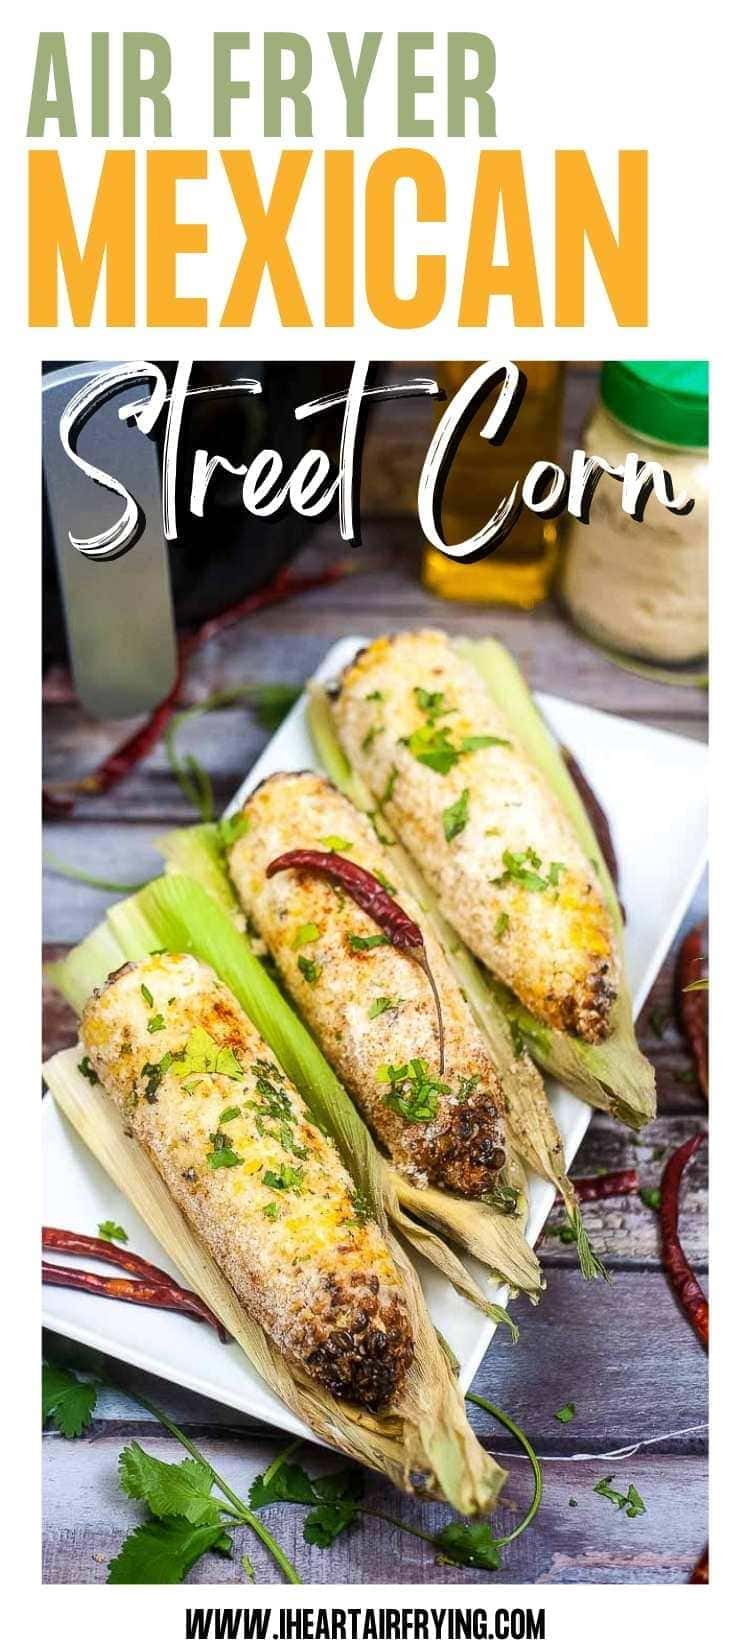 three ears of mexican street corn on a plate with text overlay